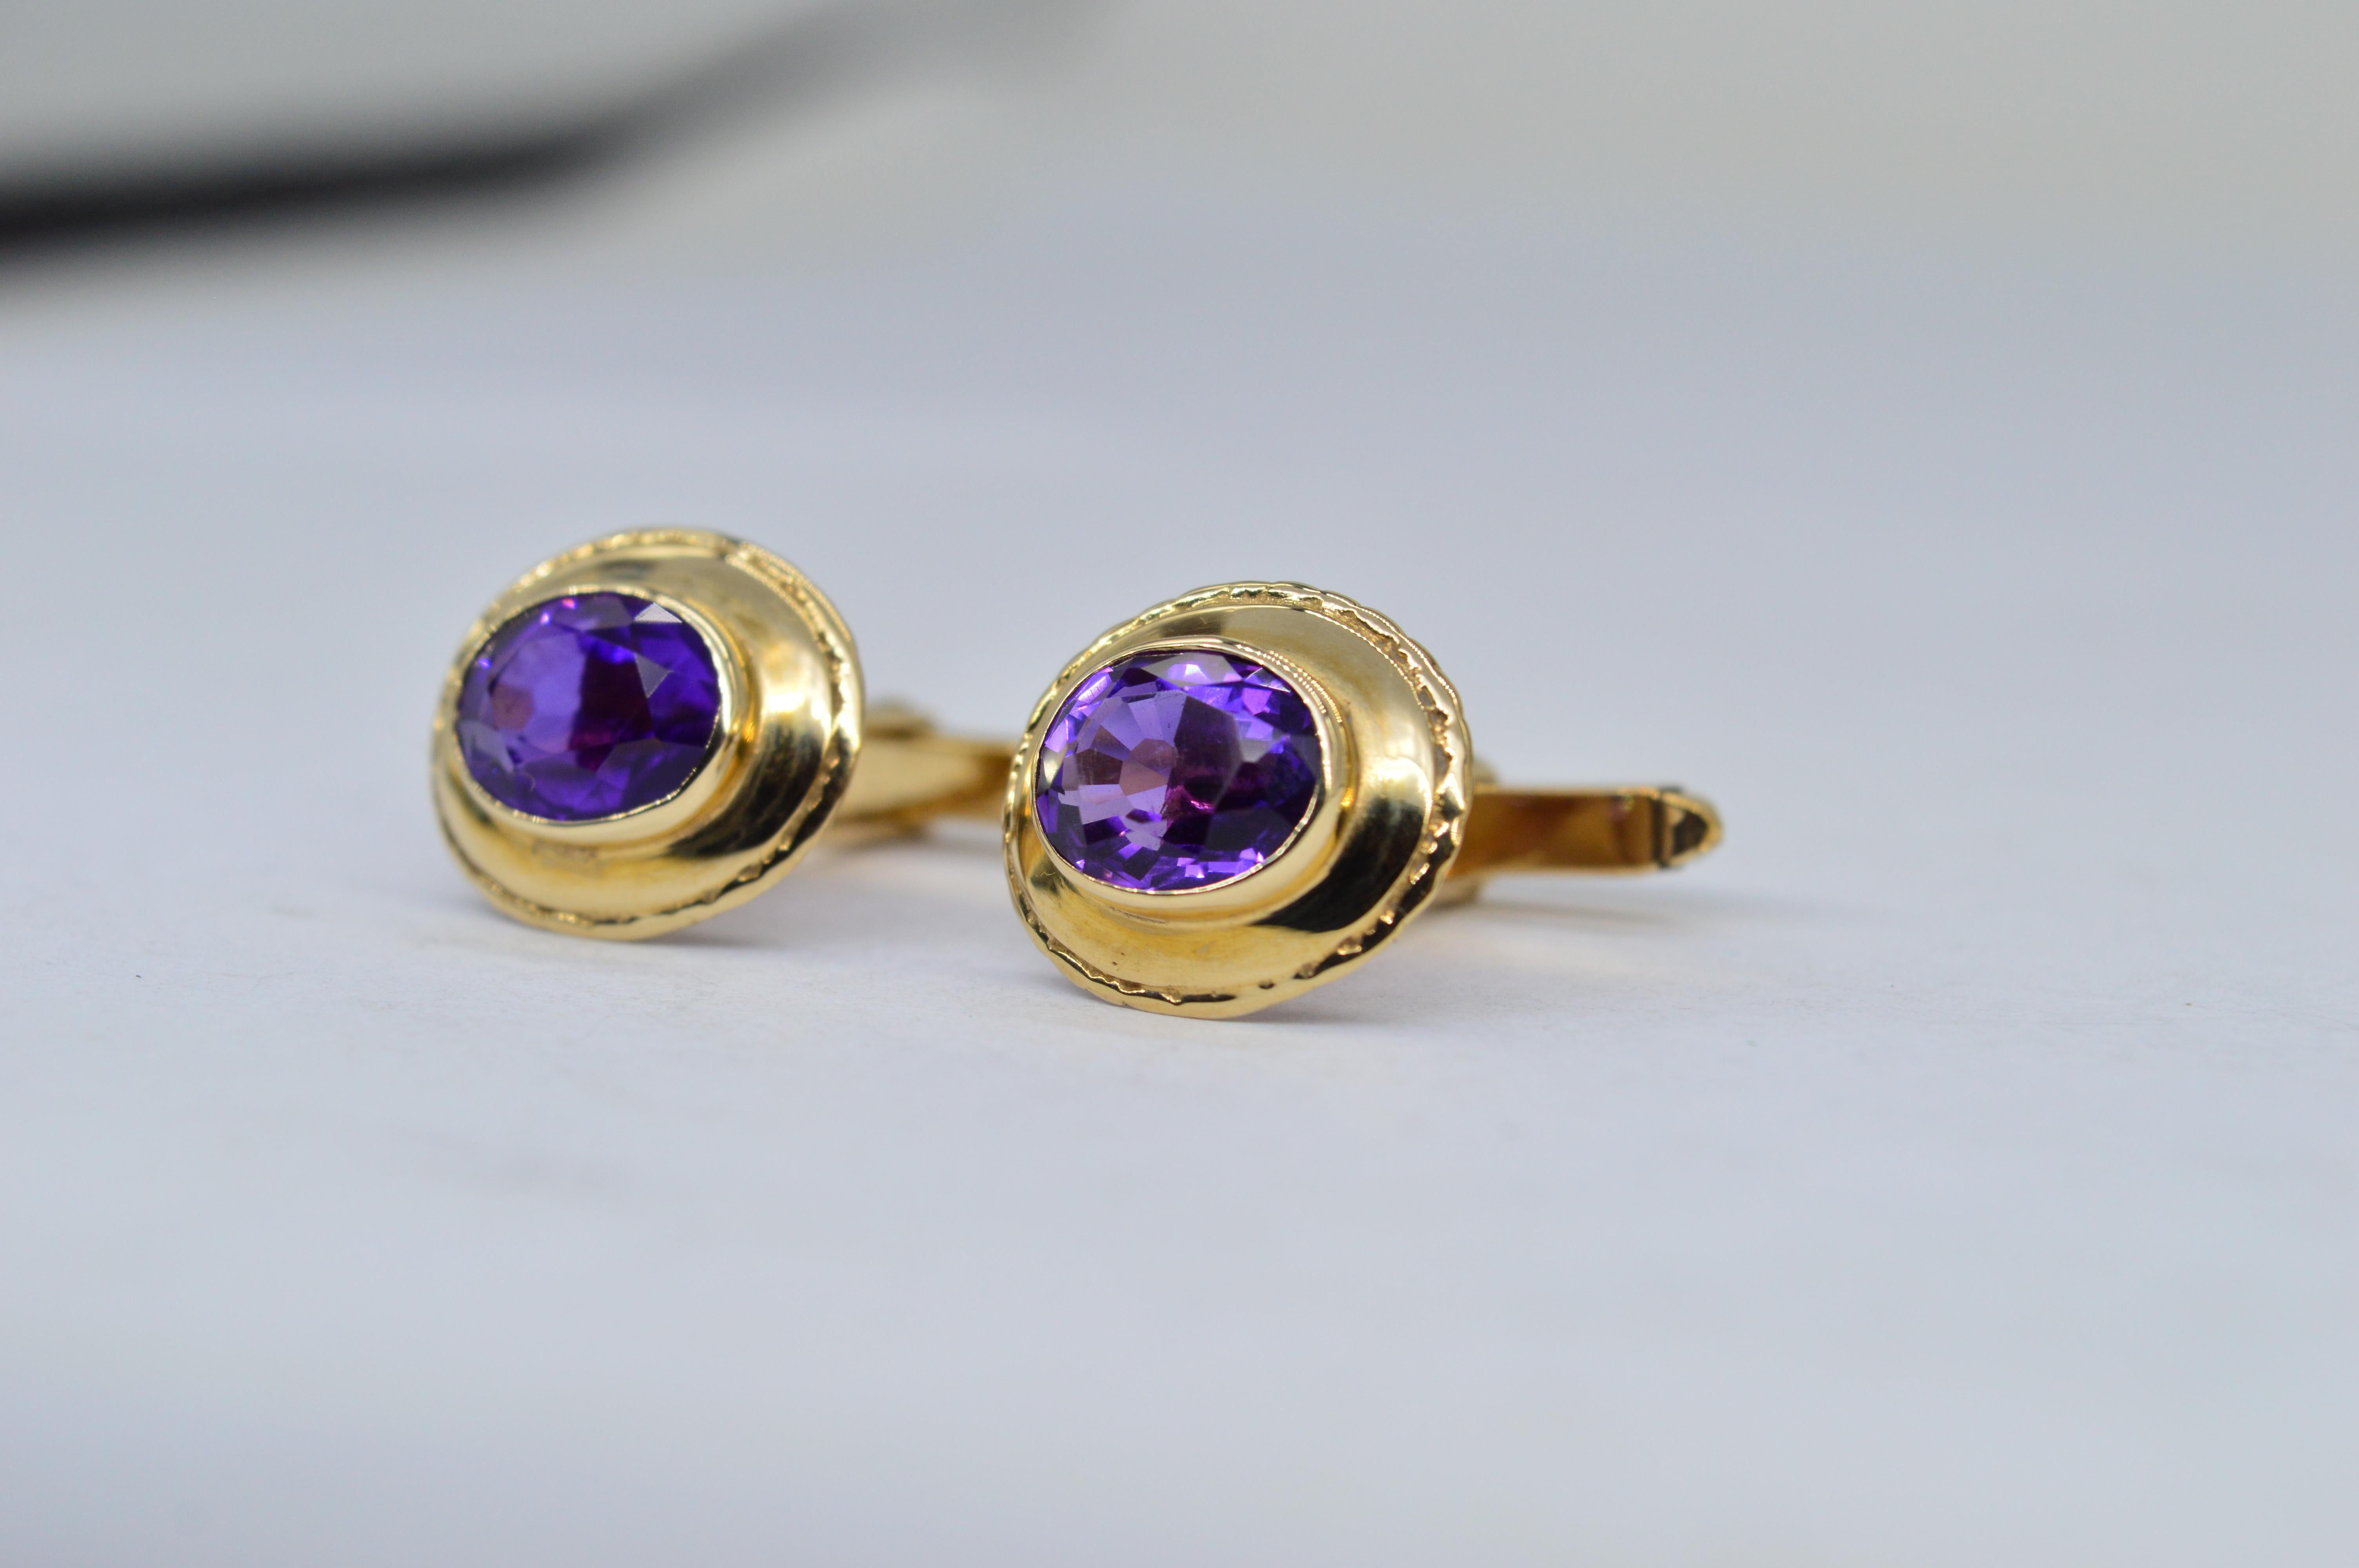 A set of 9ct gold cufflinks with flawless faceted amethysts

Classically designed, these cufflinks focus on the displaying the quality of the stones

6.07g

We have sold to the set of Hit shows like Peaky Blinders and Outlander as well as to